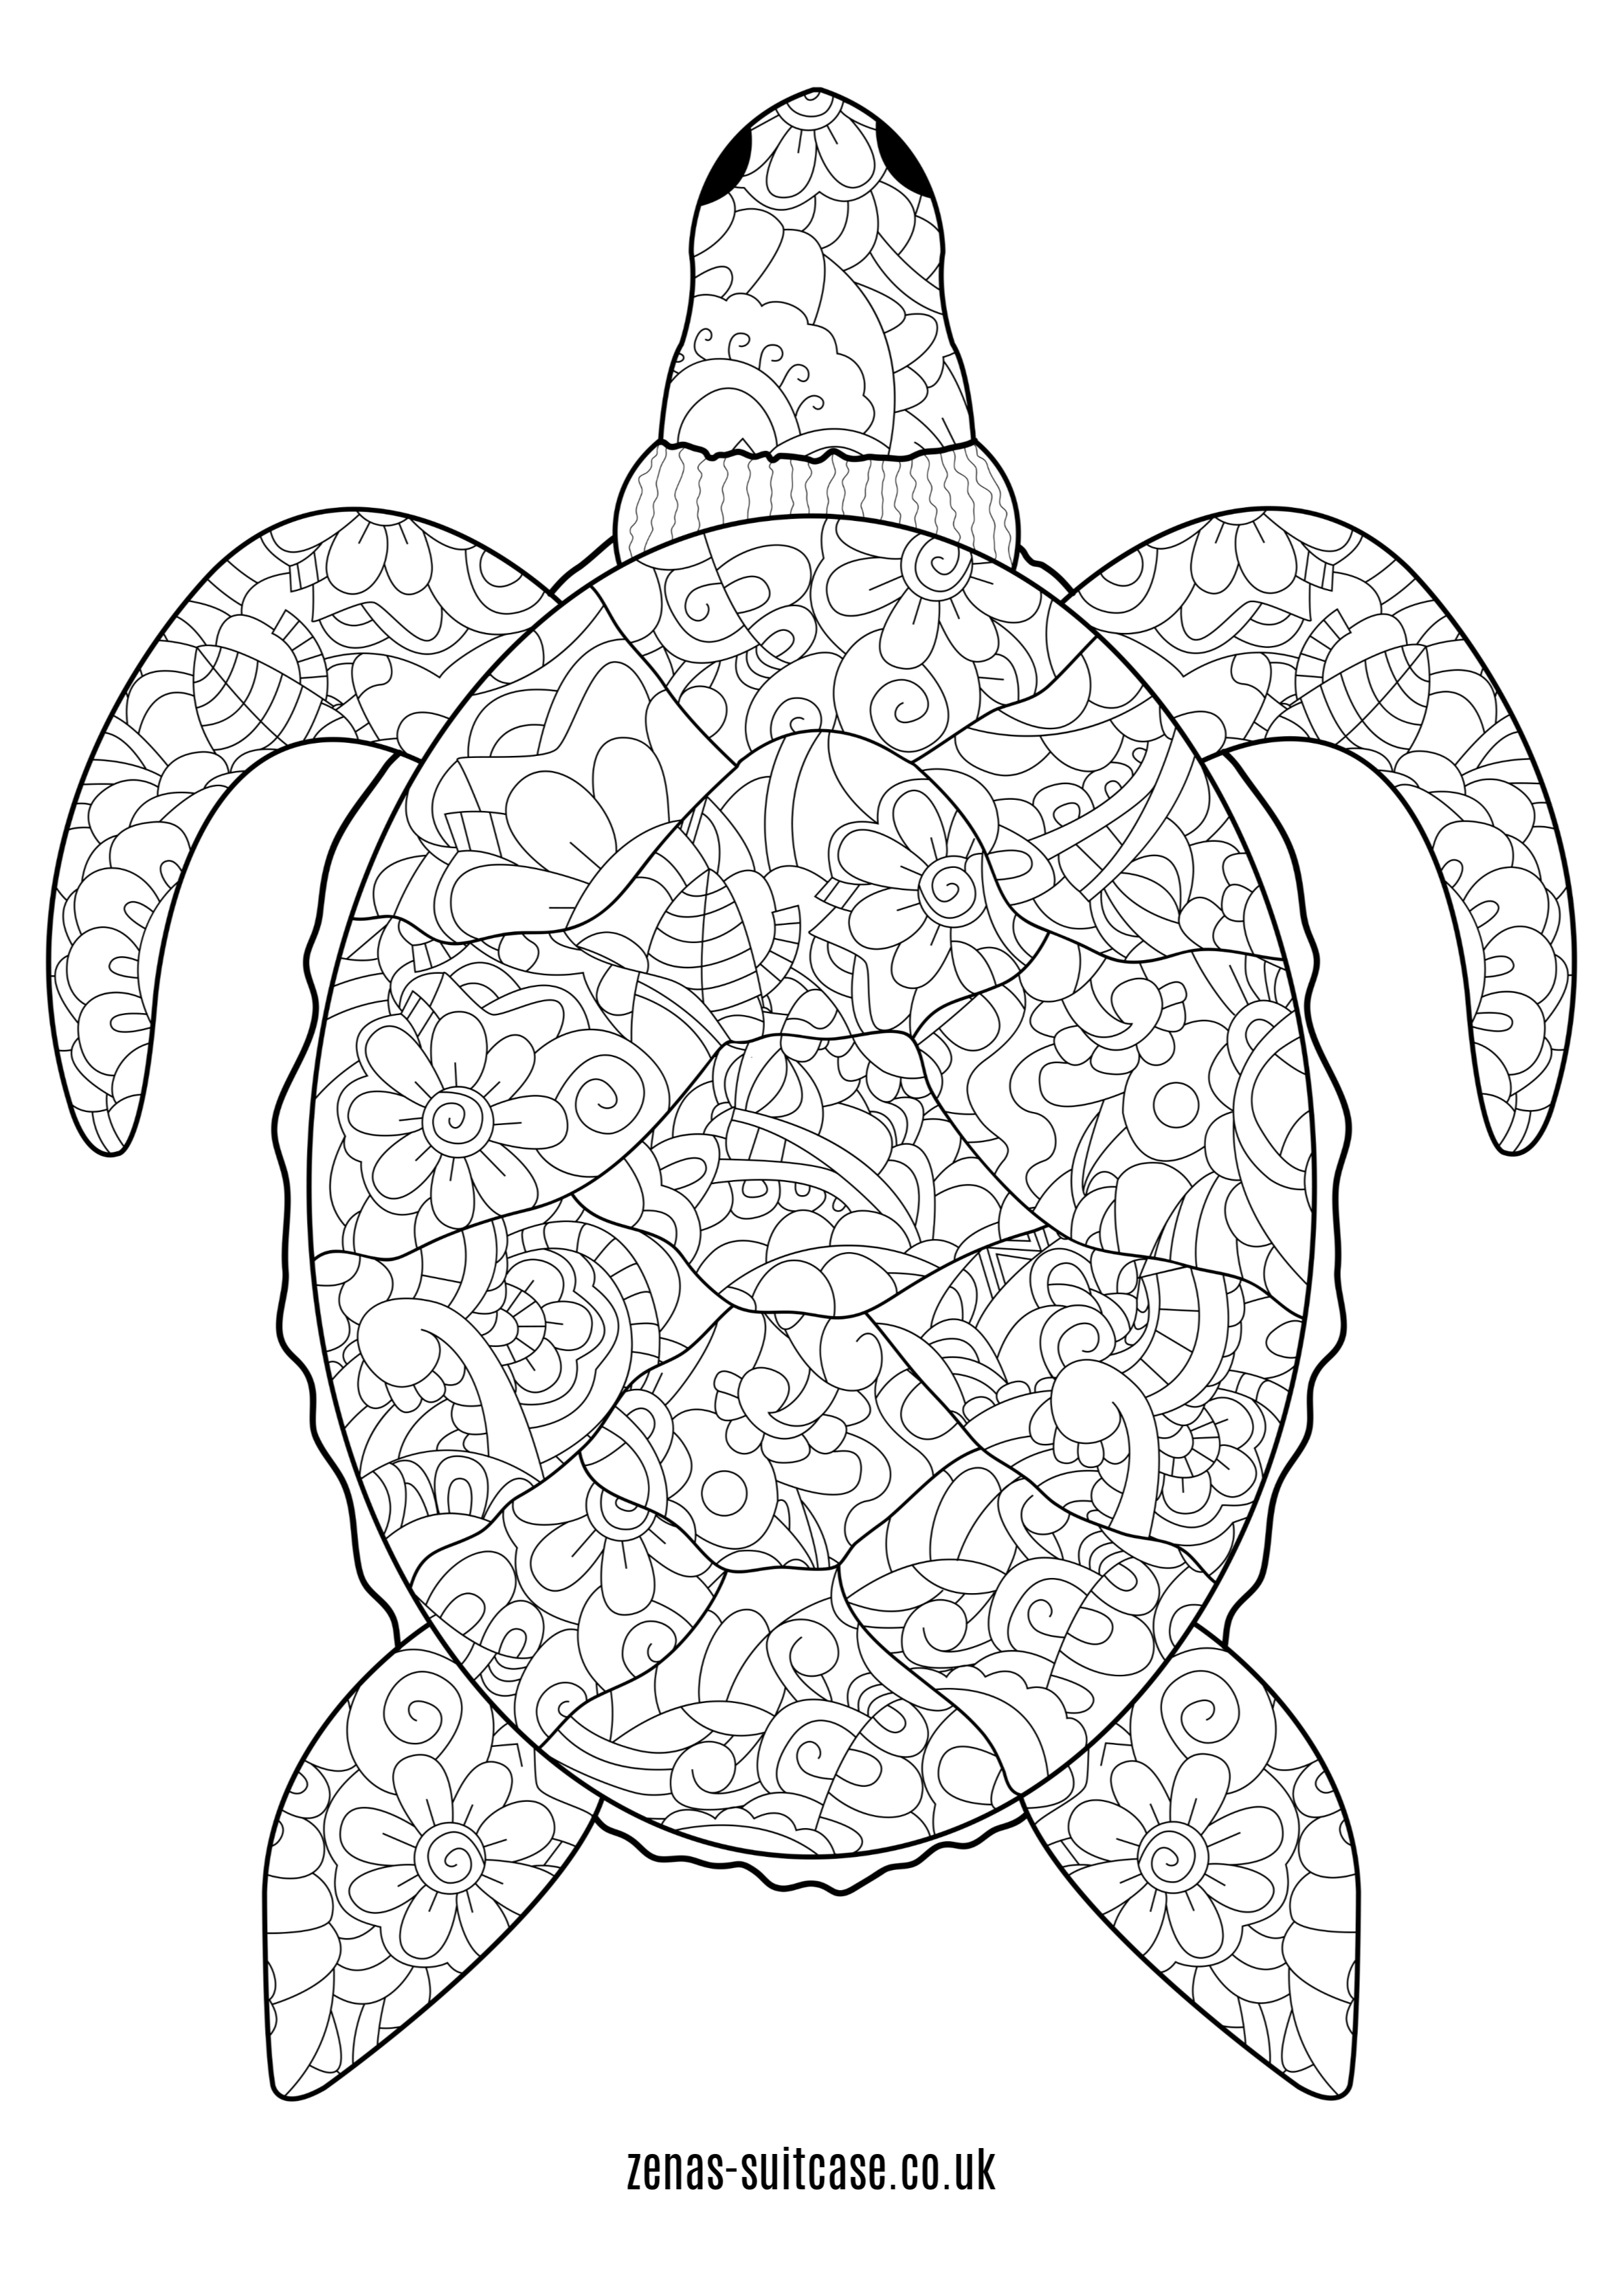 FREE Ocean & Under the Sea Colouring Pages